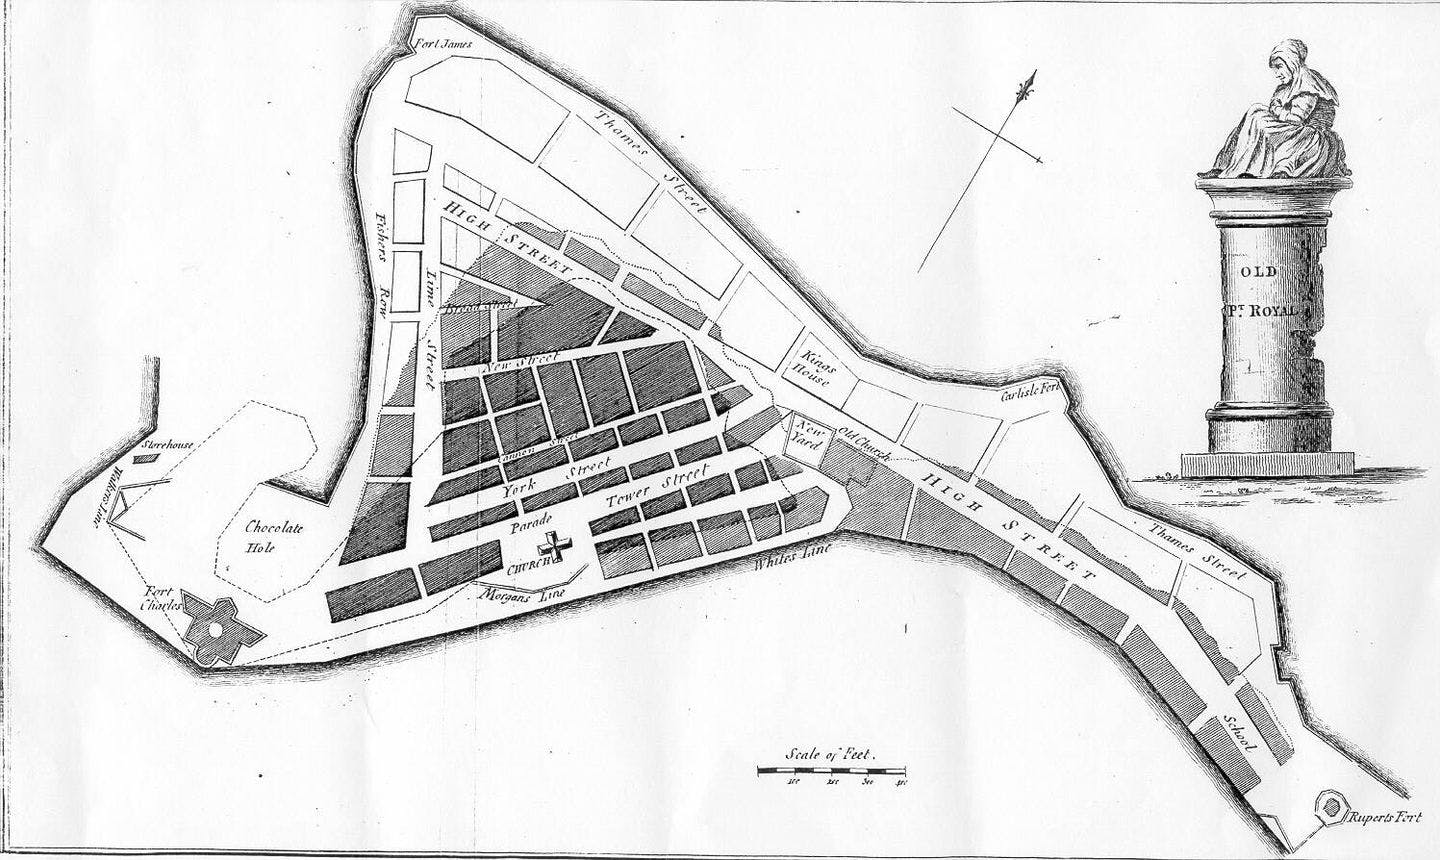 Map of the old Port Royal. White, lost in the 1692 earthquake. Slightly shaded middle section, the part of the city that was flooded by the tsunami. Darkly shaded bottom section is the part of the city that survived. Map: Wikimedia 